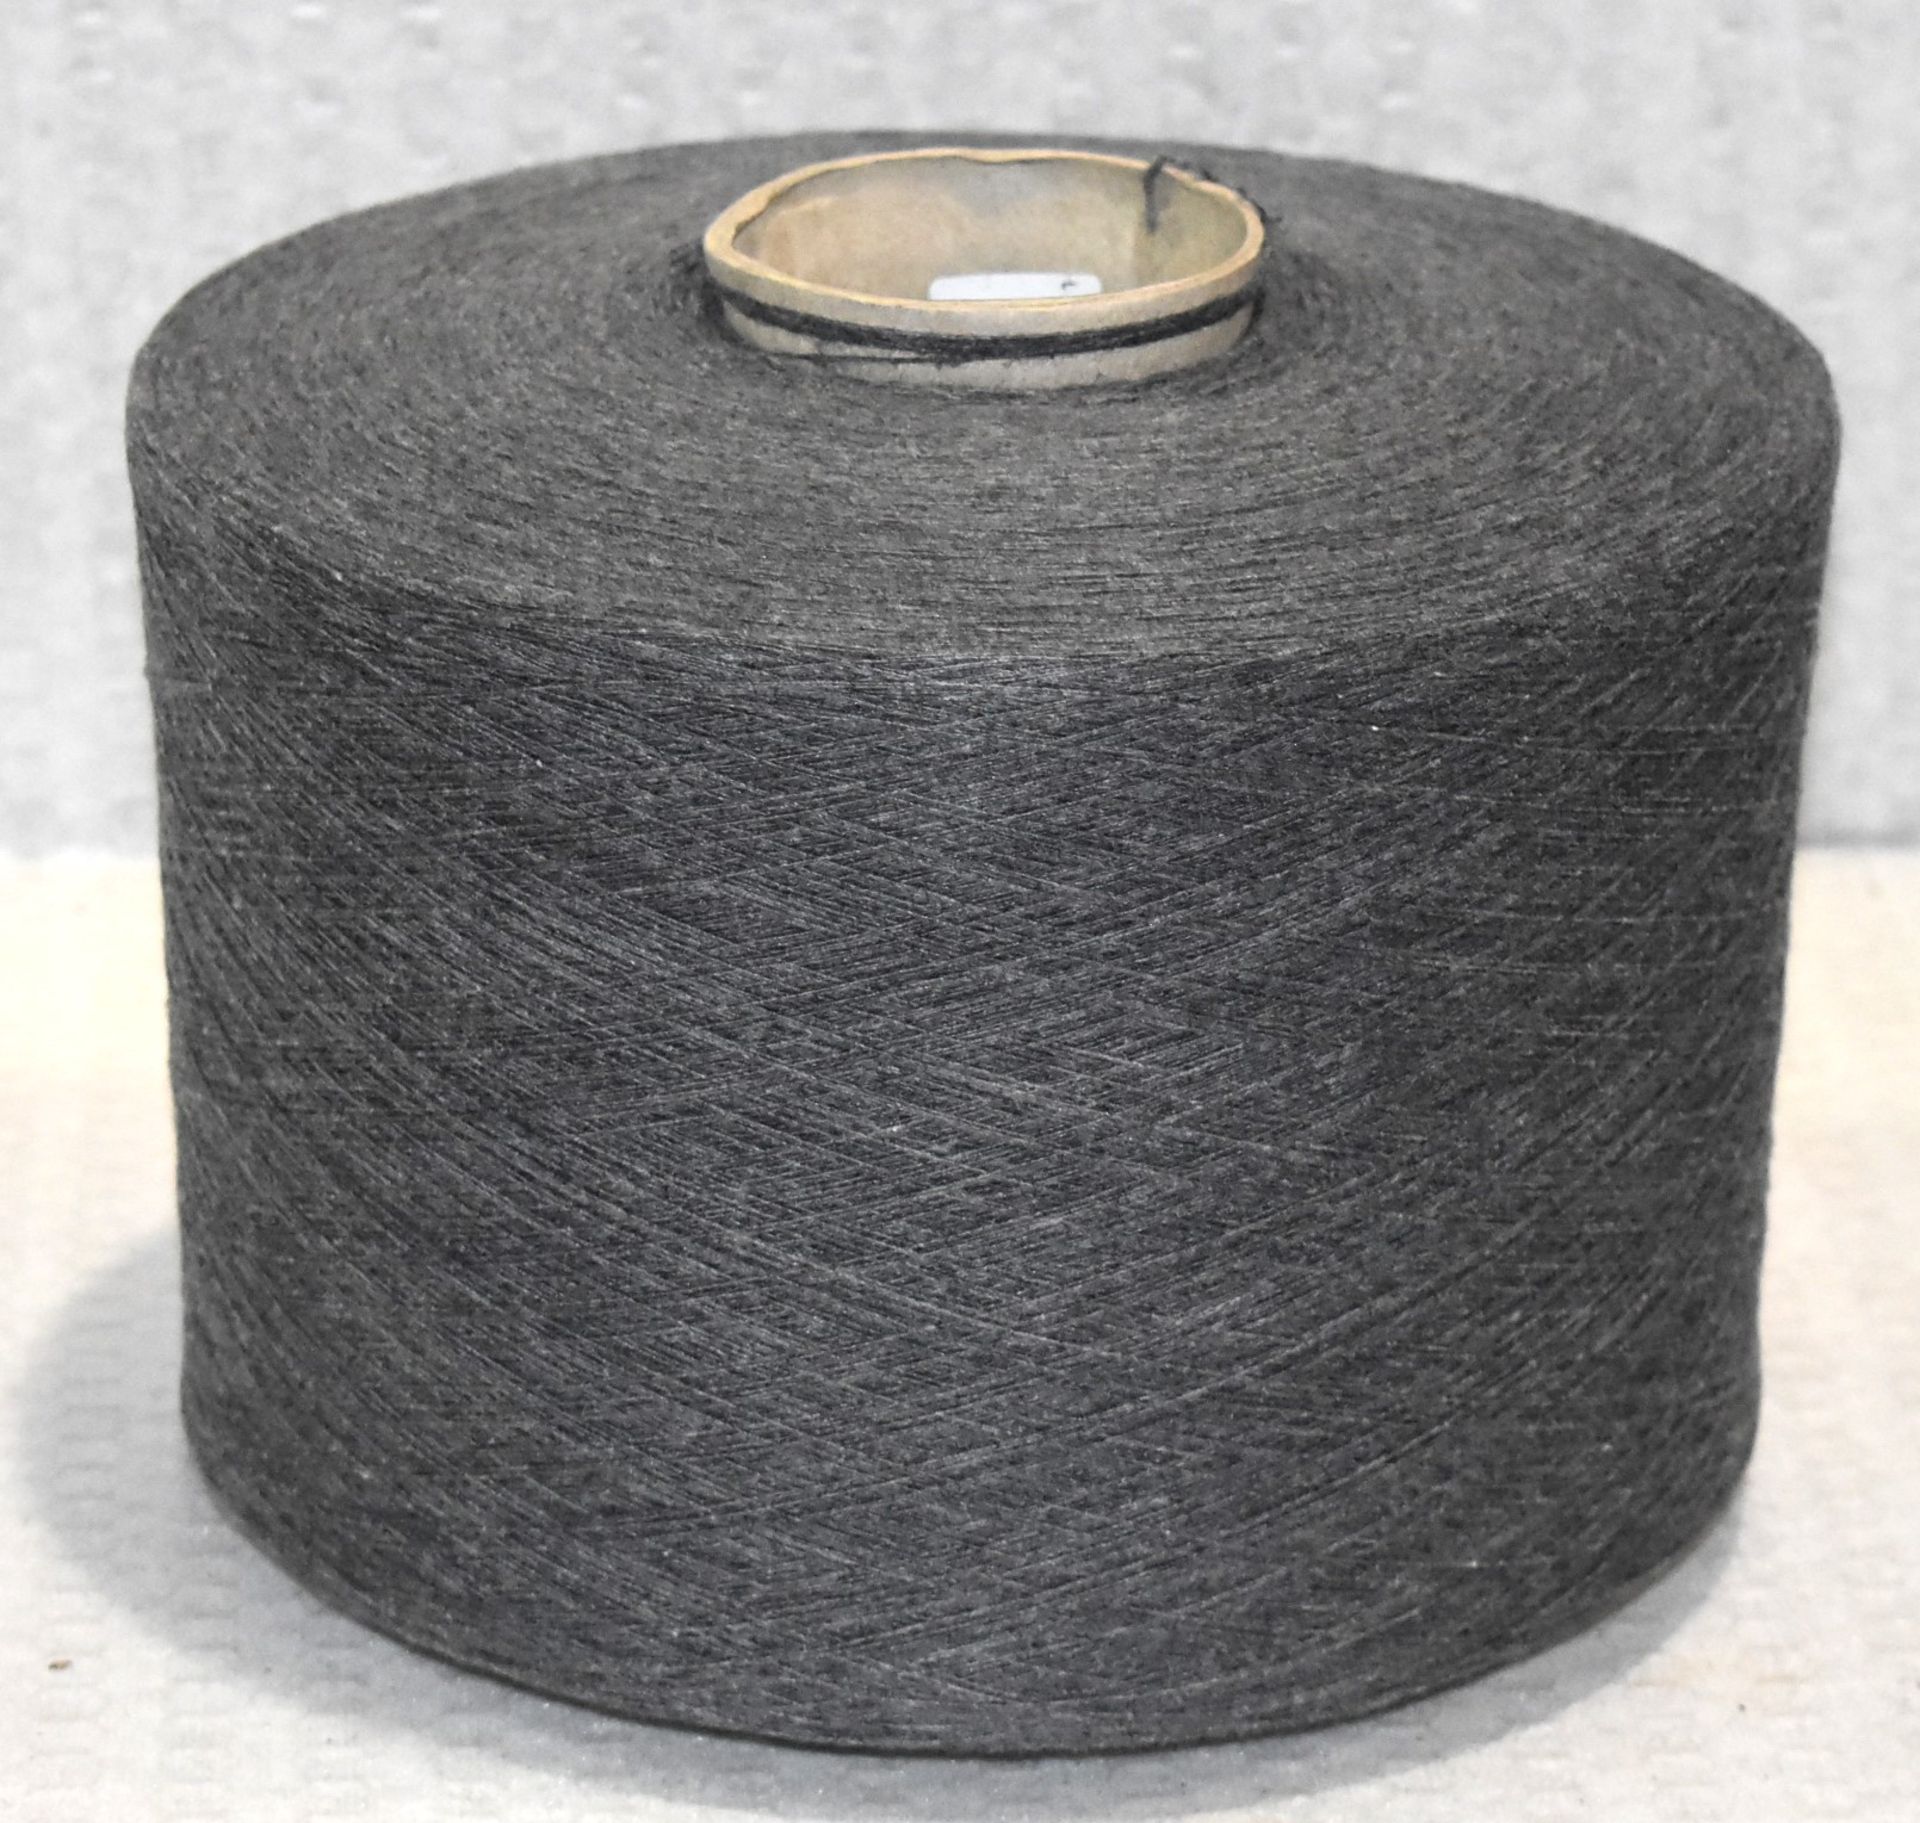 1 x Cone of 1/13 MicroCotton Knitting Yarn - Mid Grey - Approx Weight: 2,500g - New Stock ABL Yarn - Image 9 of 18